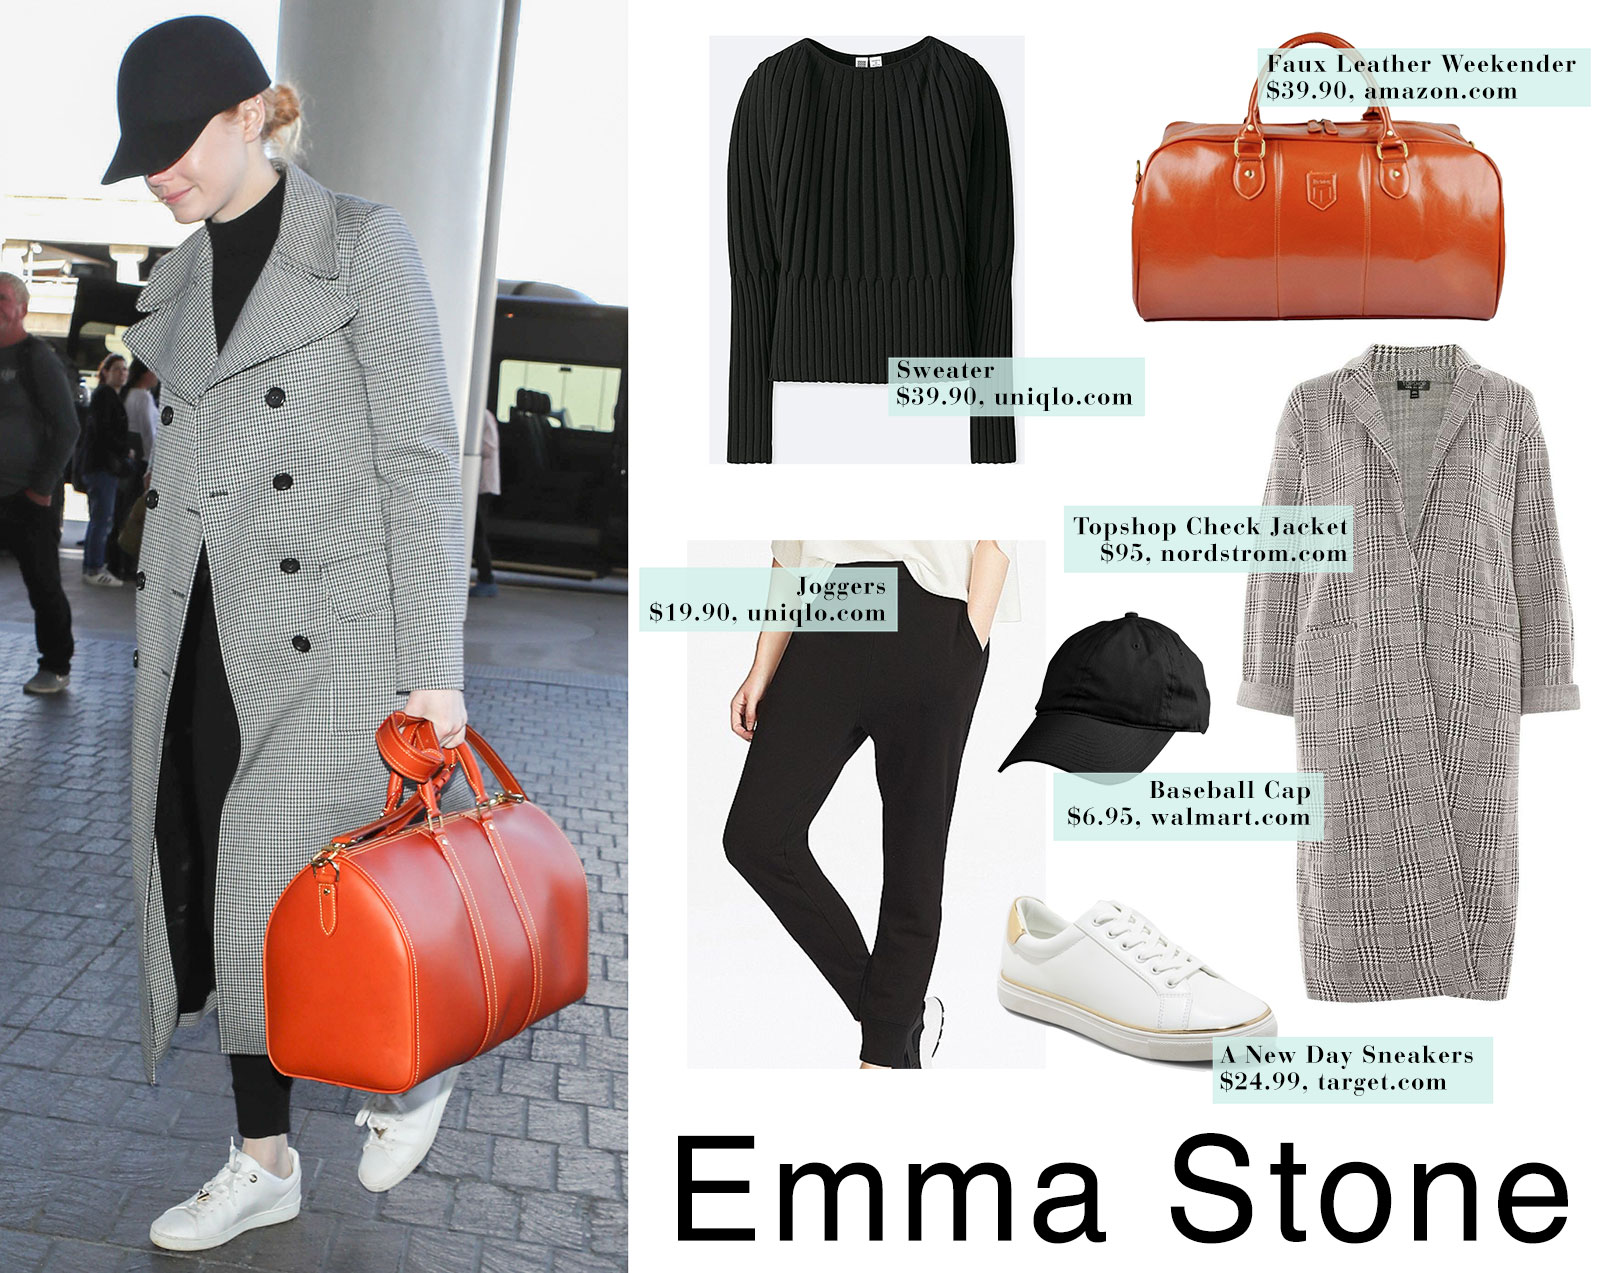 Emma Stone travels in a black monochromatic look with white sneakers, leather duffel weekender suitcase, black baseball cap and gray check plaid trench coat.